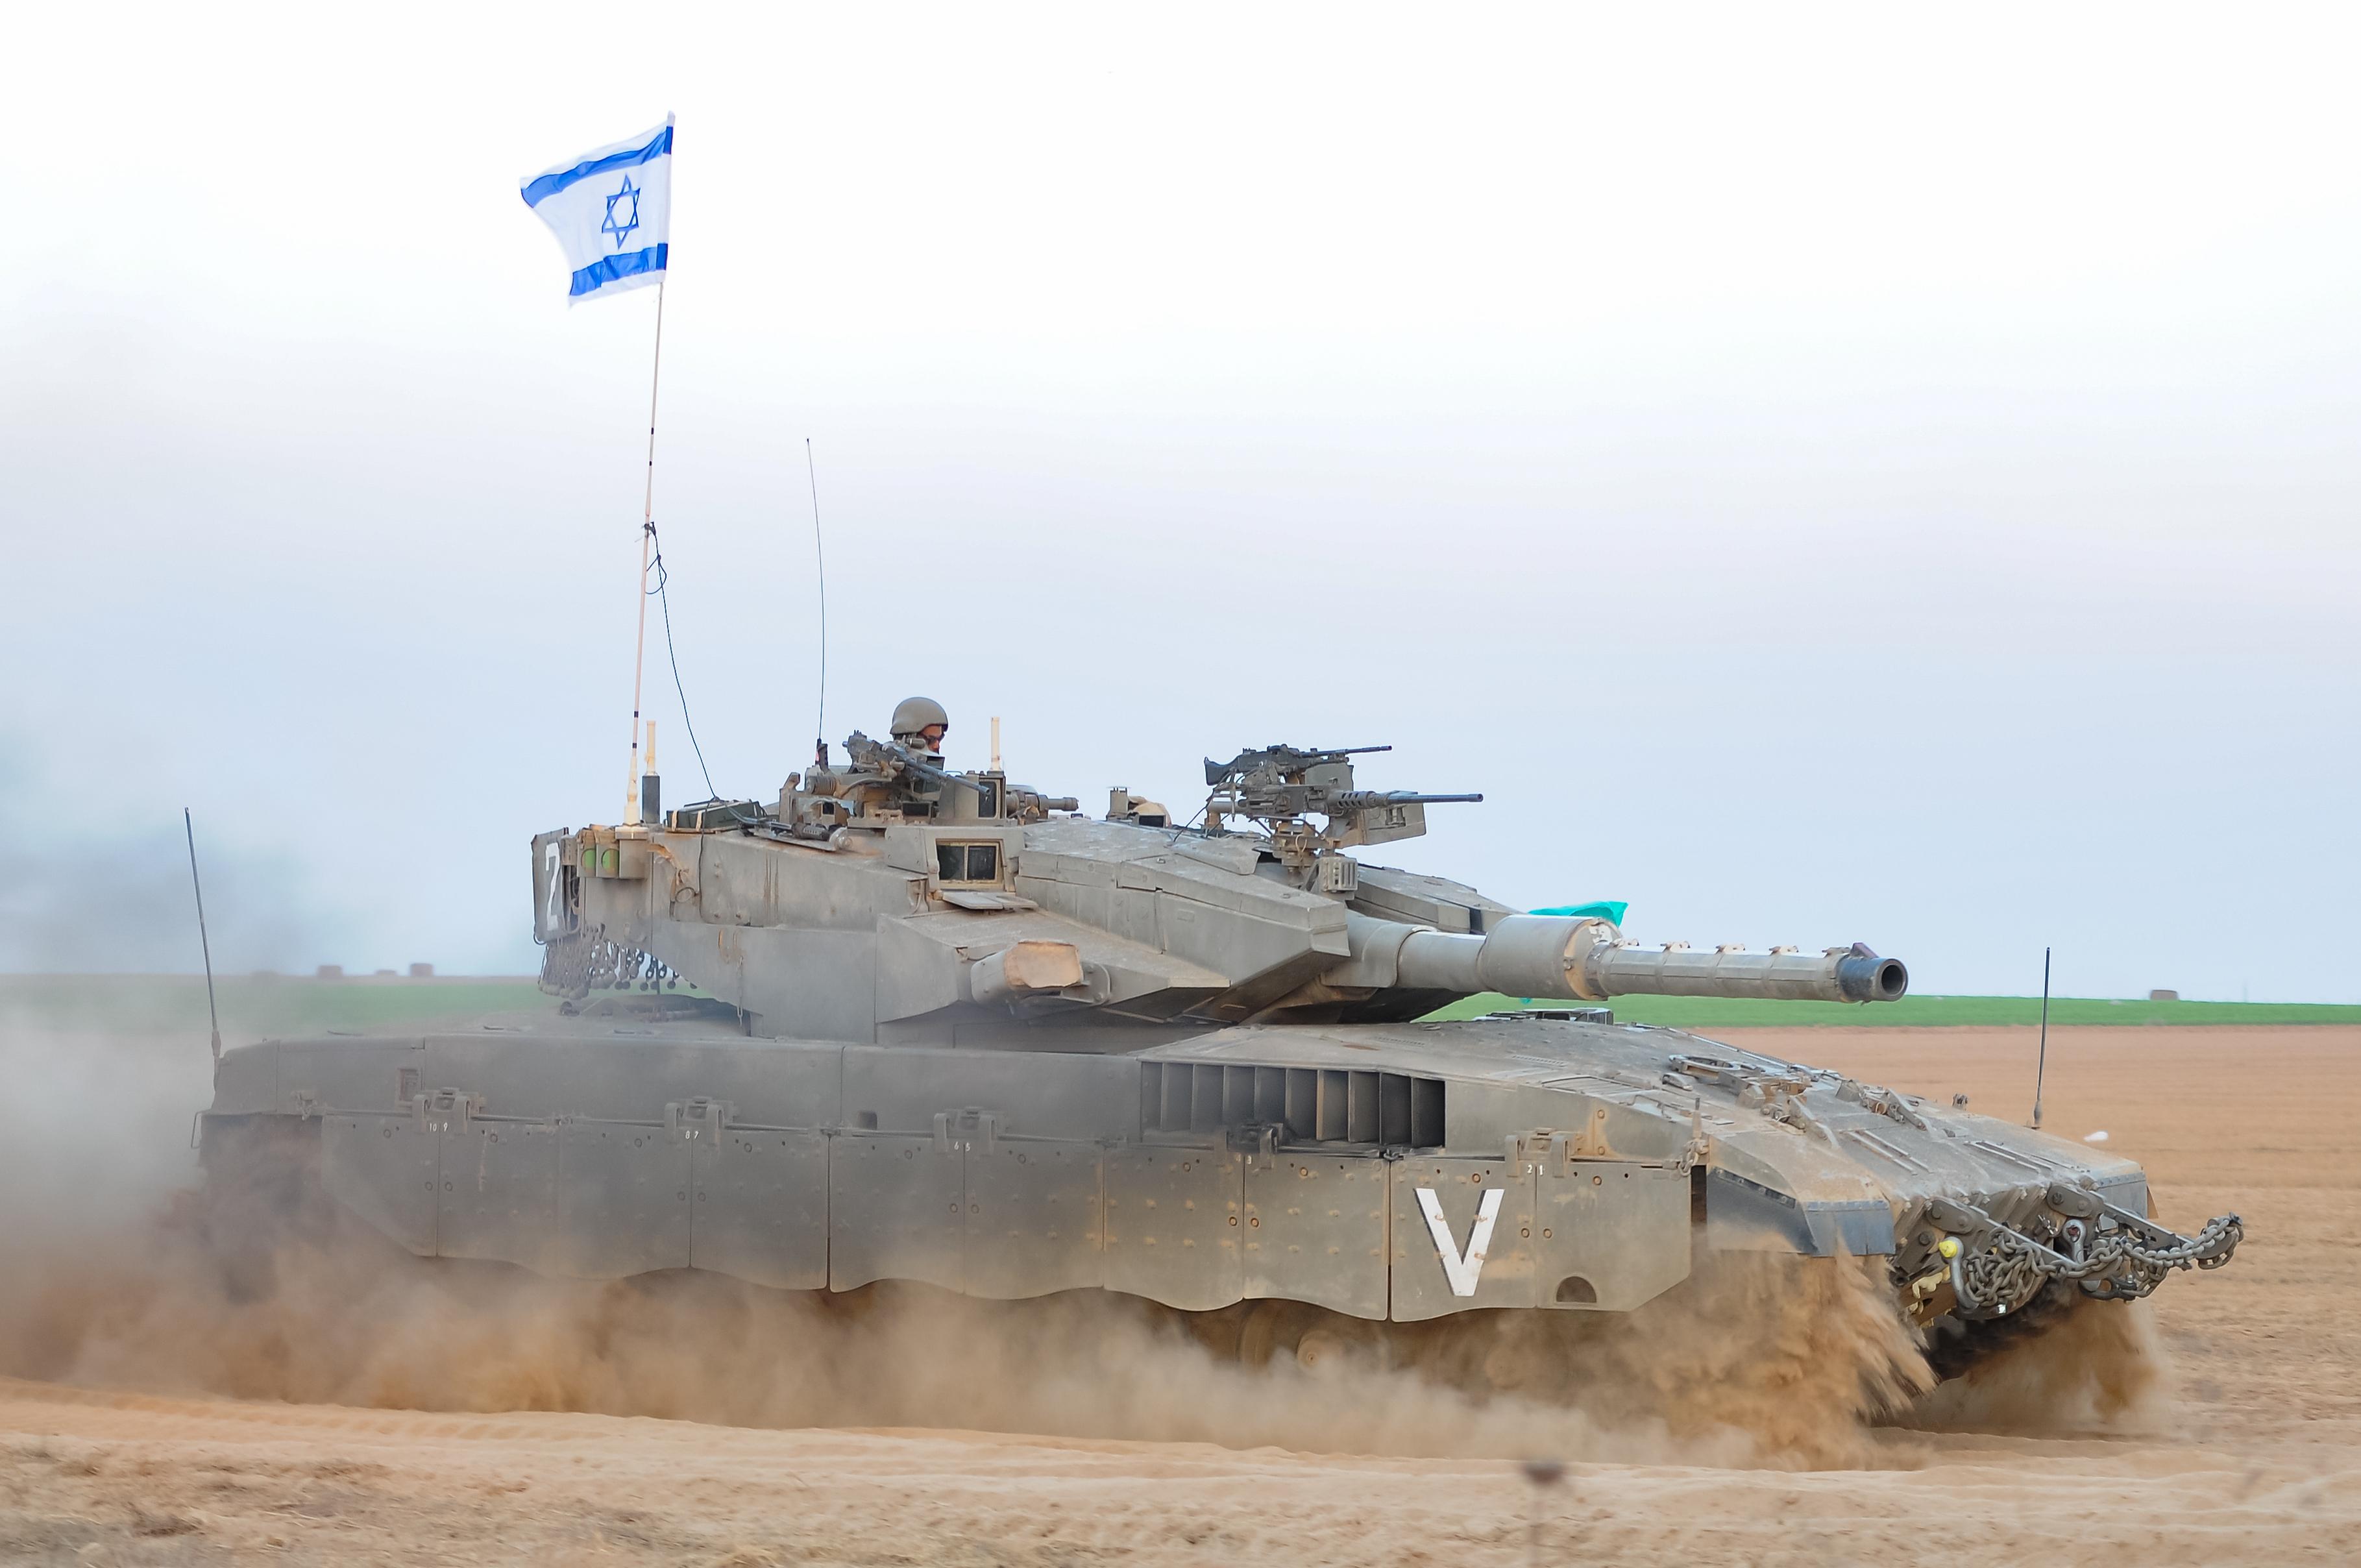 israel south 21/7/2014 south idf tanks are heading fast toward crossing the gaza border in israel gaza conflict